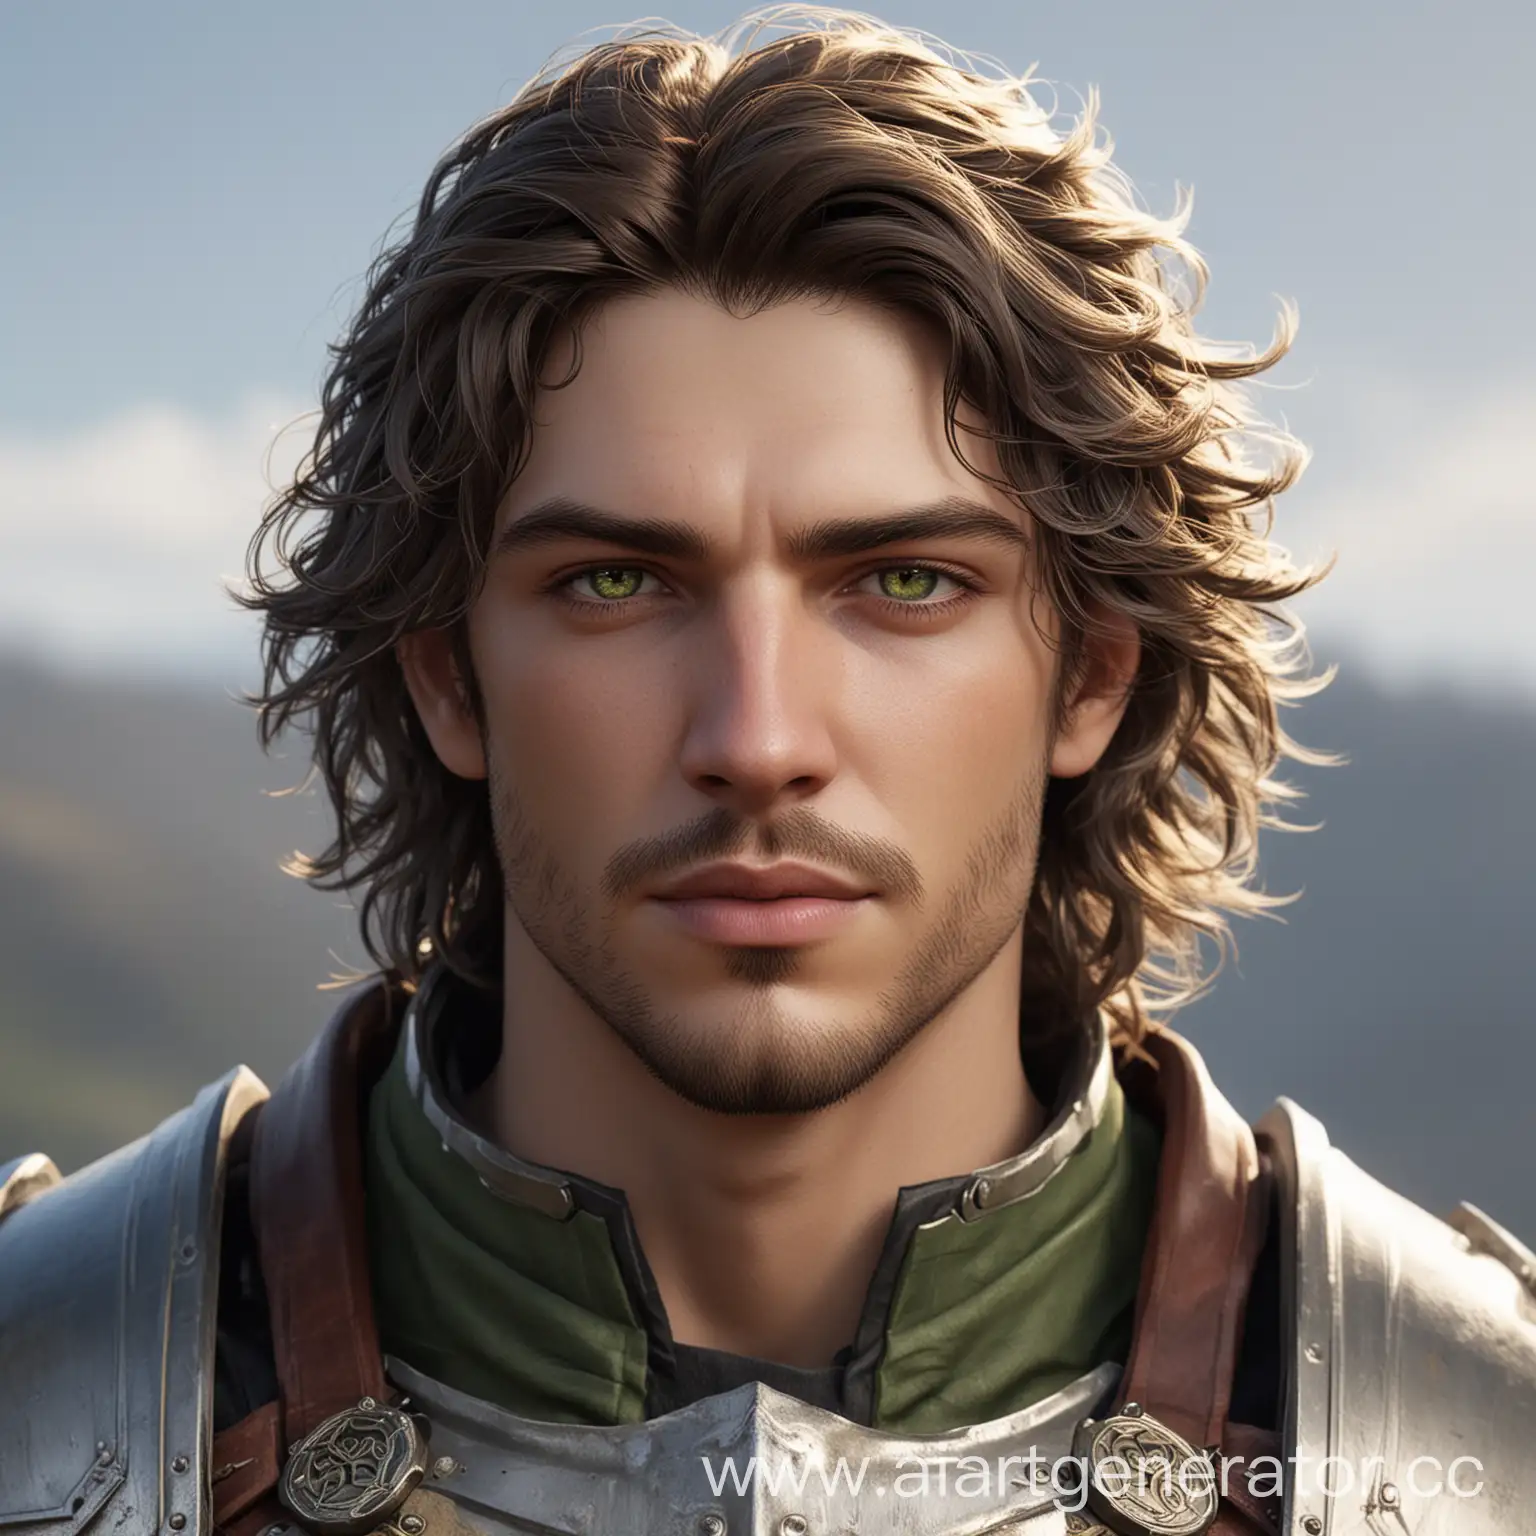 Paladin-Warrior-with-Wavy-Hair-and-Piercing-Green-Eyes